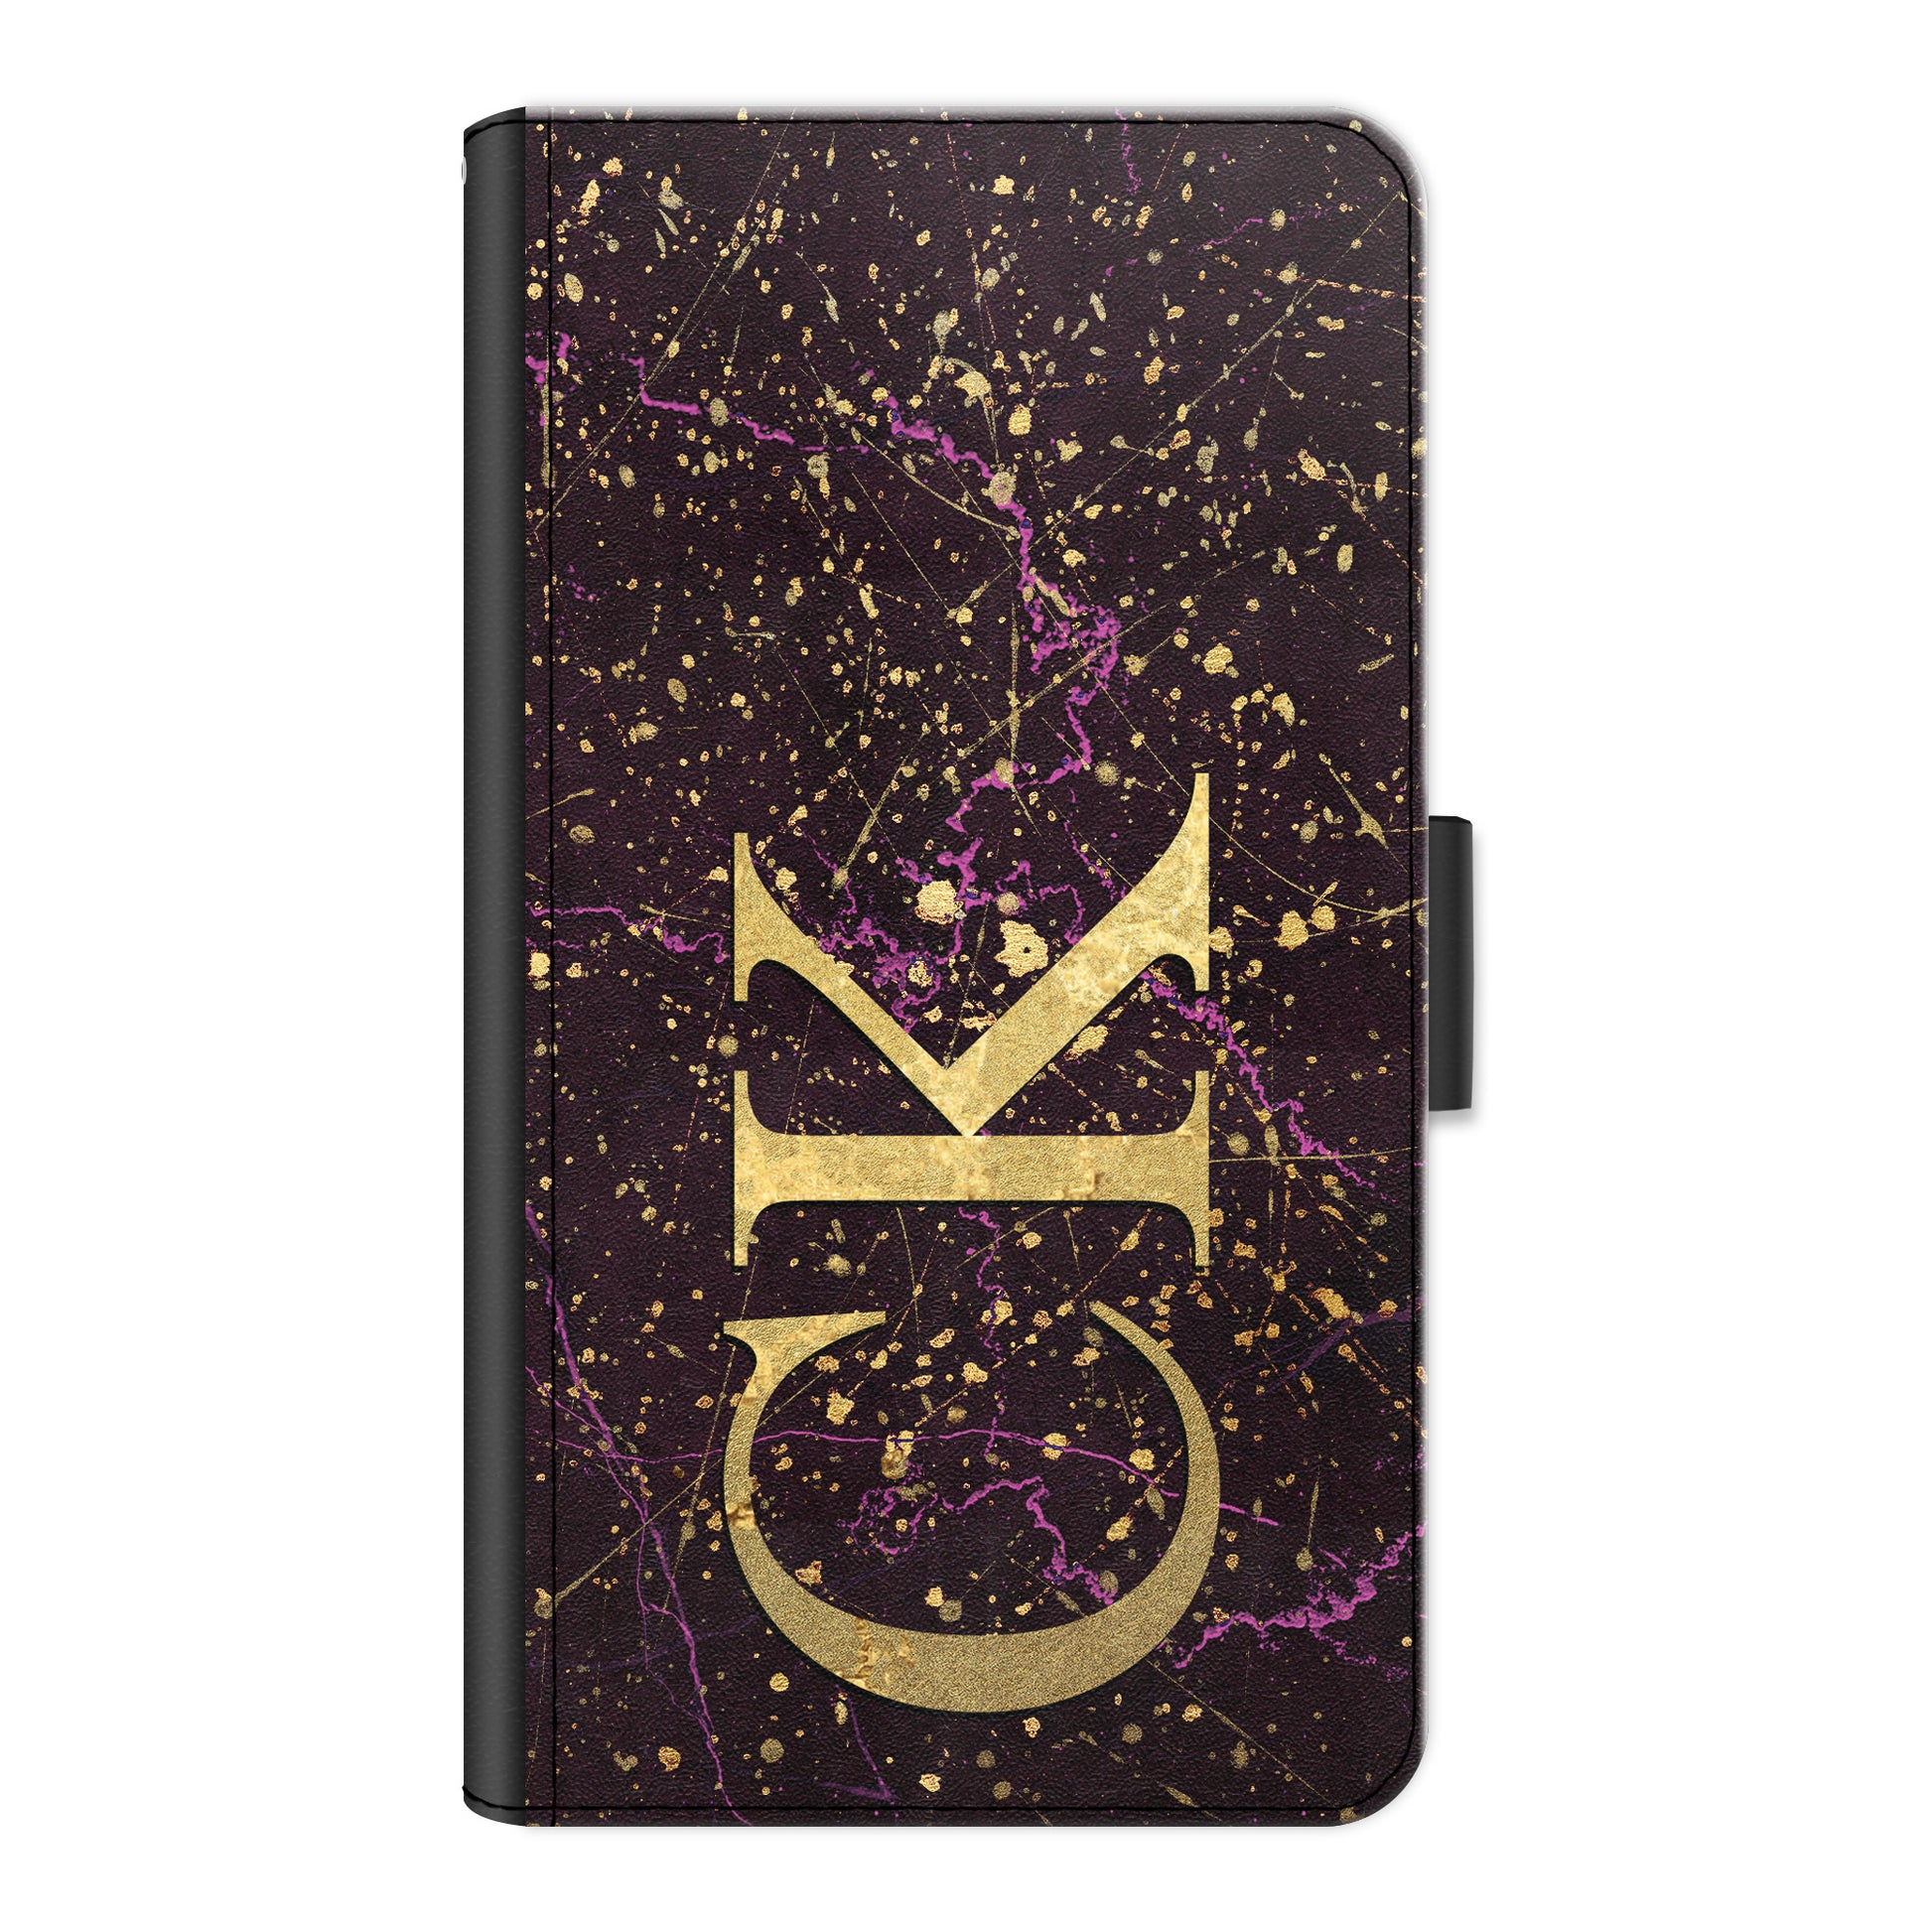 Personalised Sony Phone Leather Wallet with Gold Initials on Pink and Gold Infused Black Marble